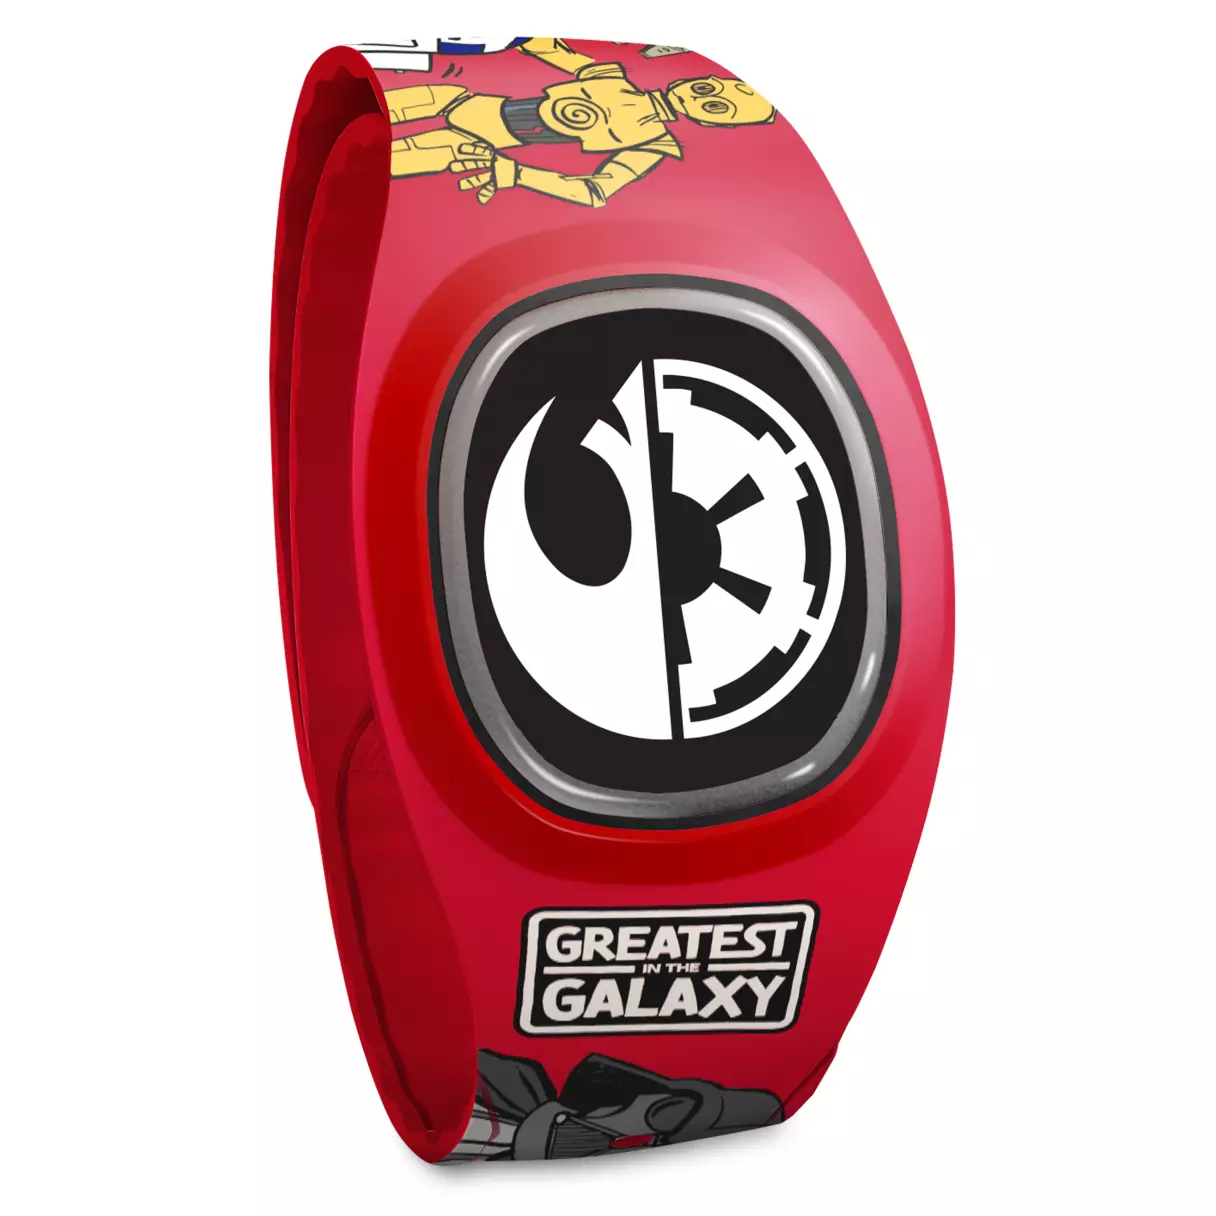 Star Wars MagicBand+ - Disney World Packing Guide